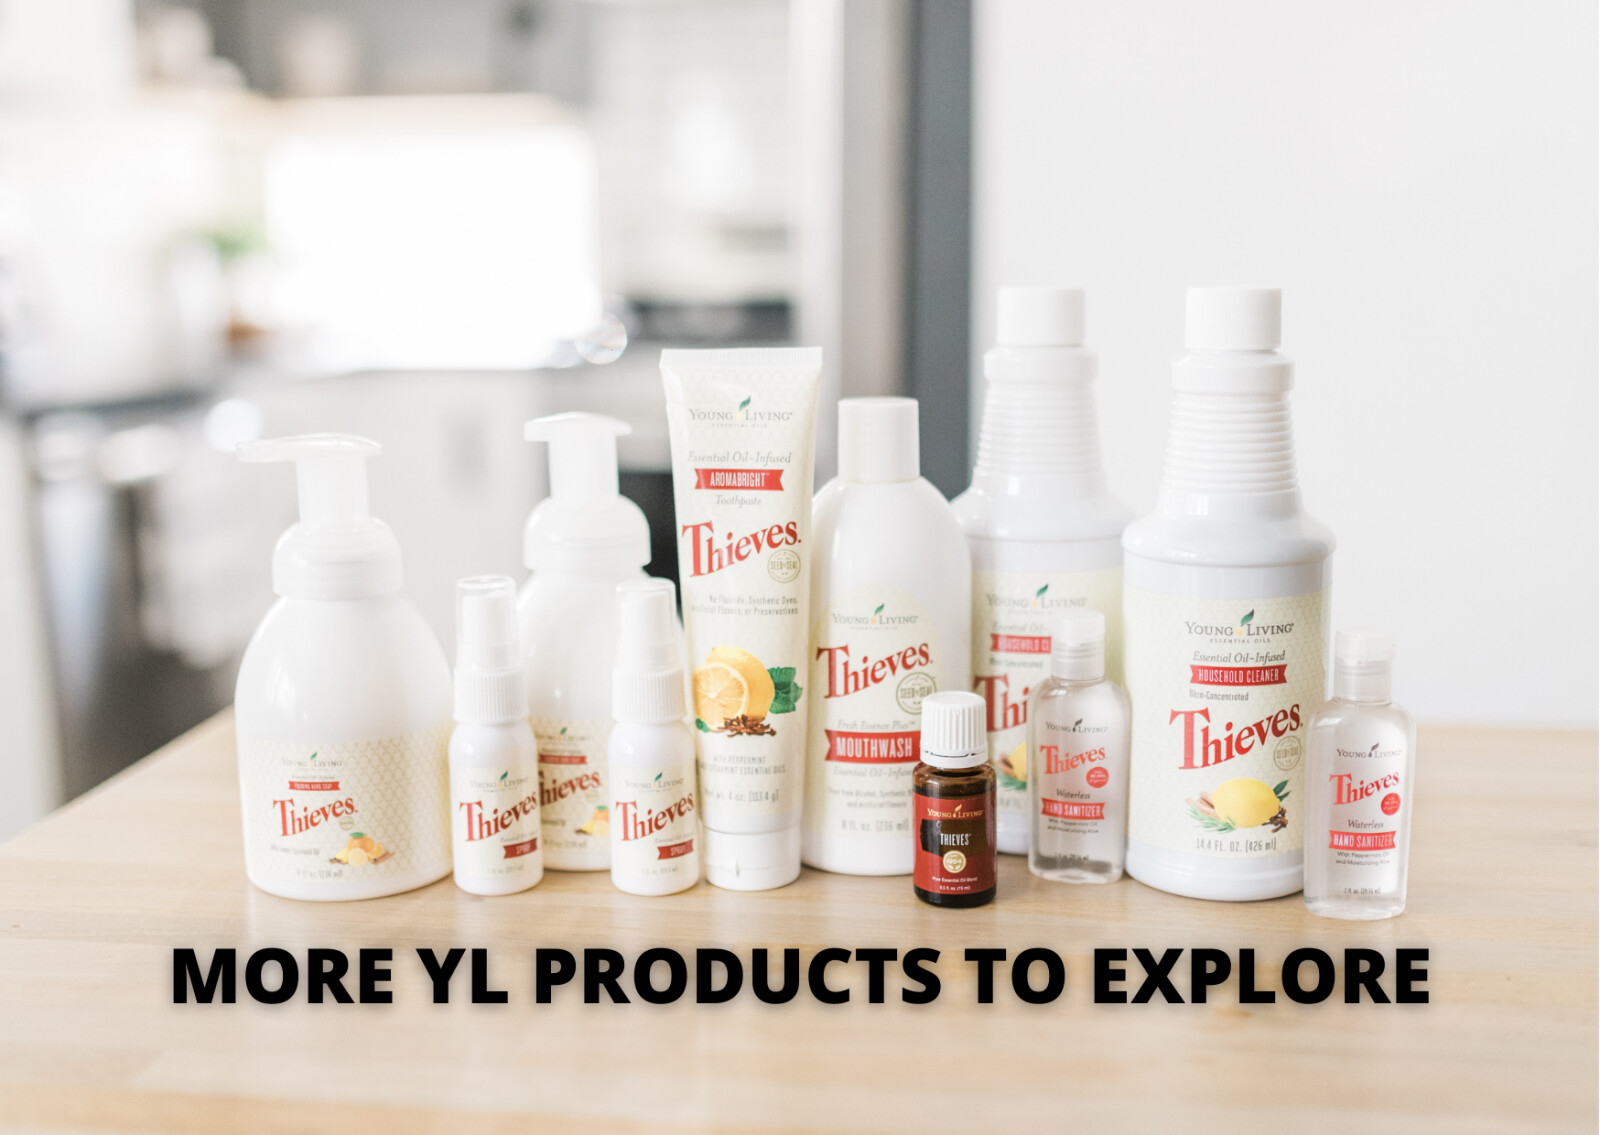 MORE YL PRODUCTS TO EXPLORE